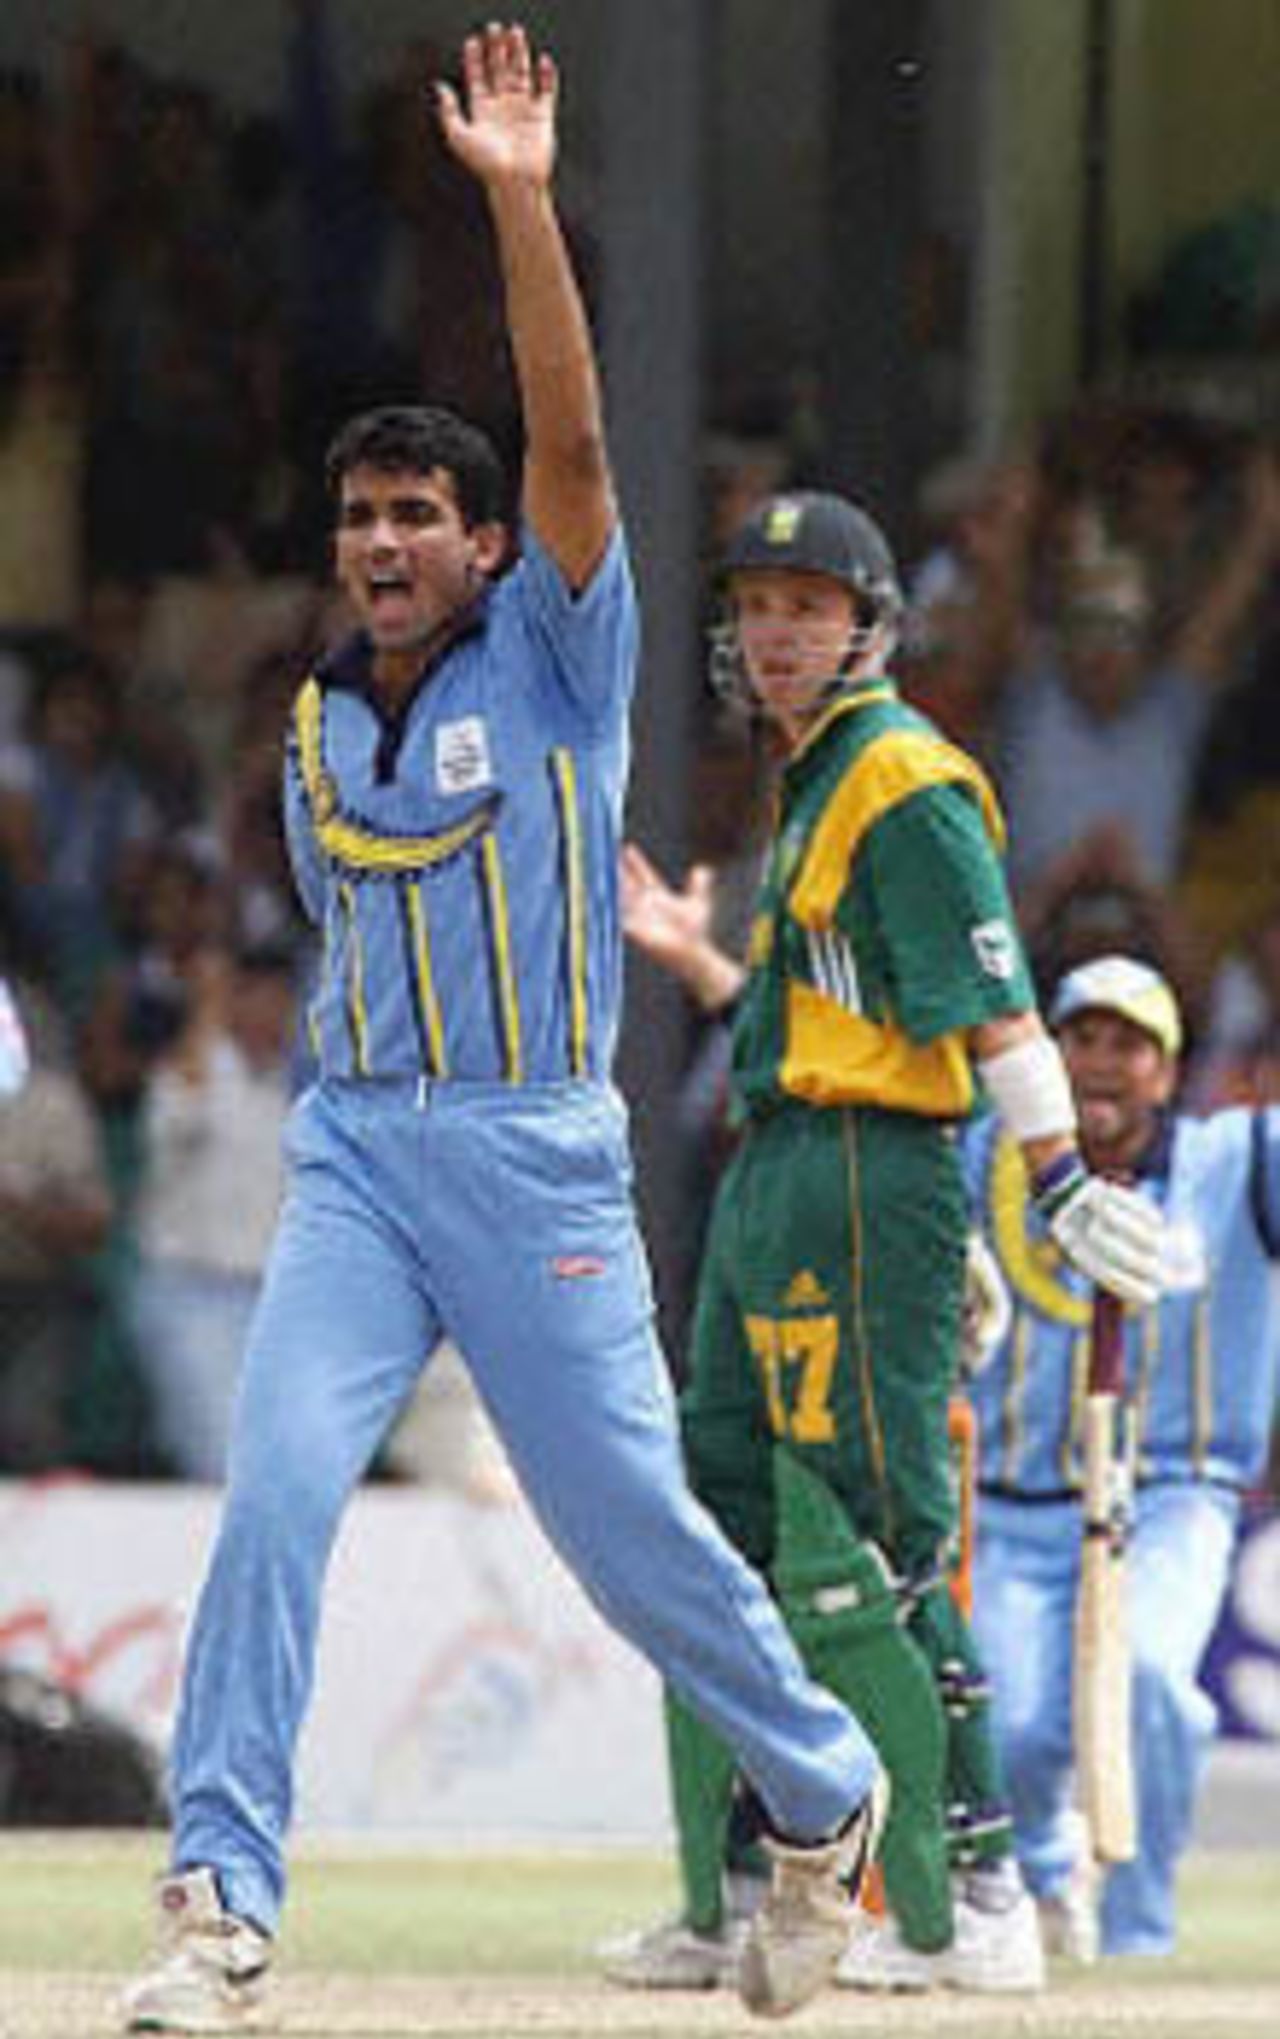 Zaheer Khan makes a successfull appeal for caught behind against Dippenaar, ICC KnockOut, 2000/01, 2nd Semi Final, India v South Africa, Gymkhana Club Ground, Nairobi, 13 October 2000.